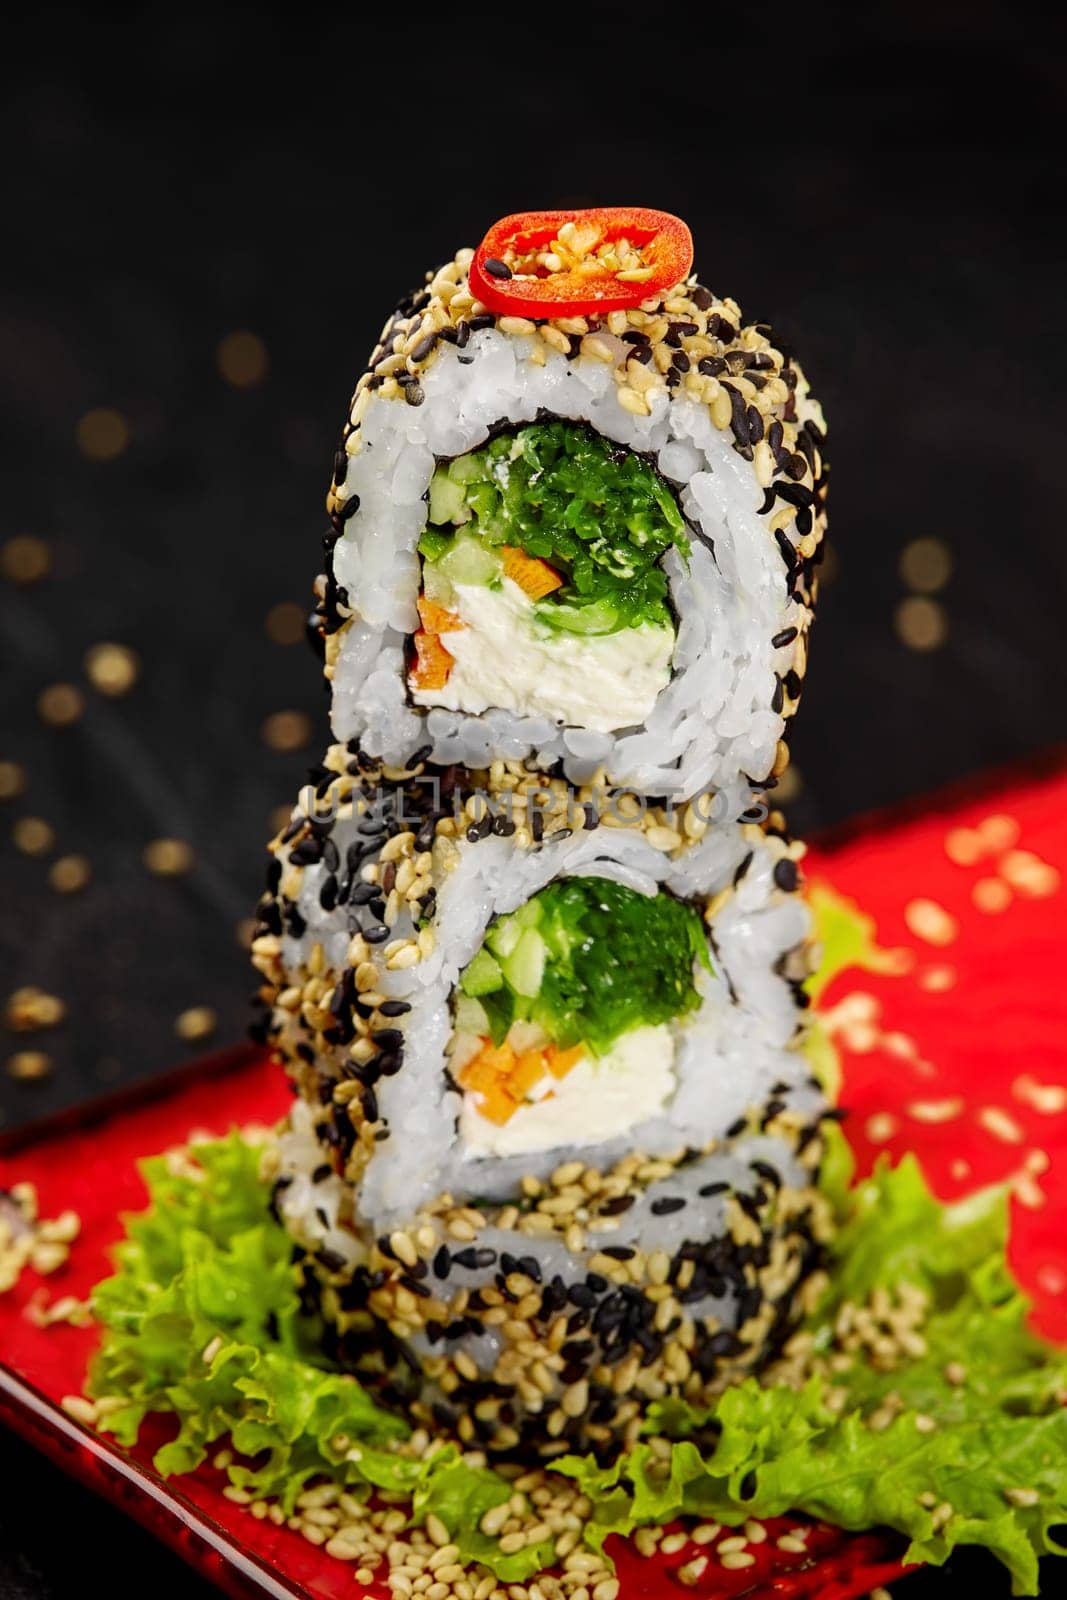 Closeup of appetizing light vegetarian sesame sushi rolls with juicy filling of cream cheese, carrot, hiyashi wakame, lettuce and cucumber garnished with spicy chili pepper slice, stacked on red plate